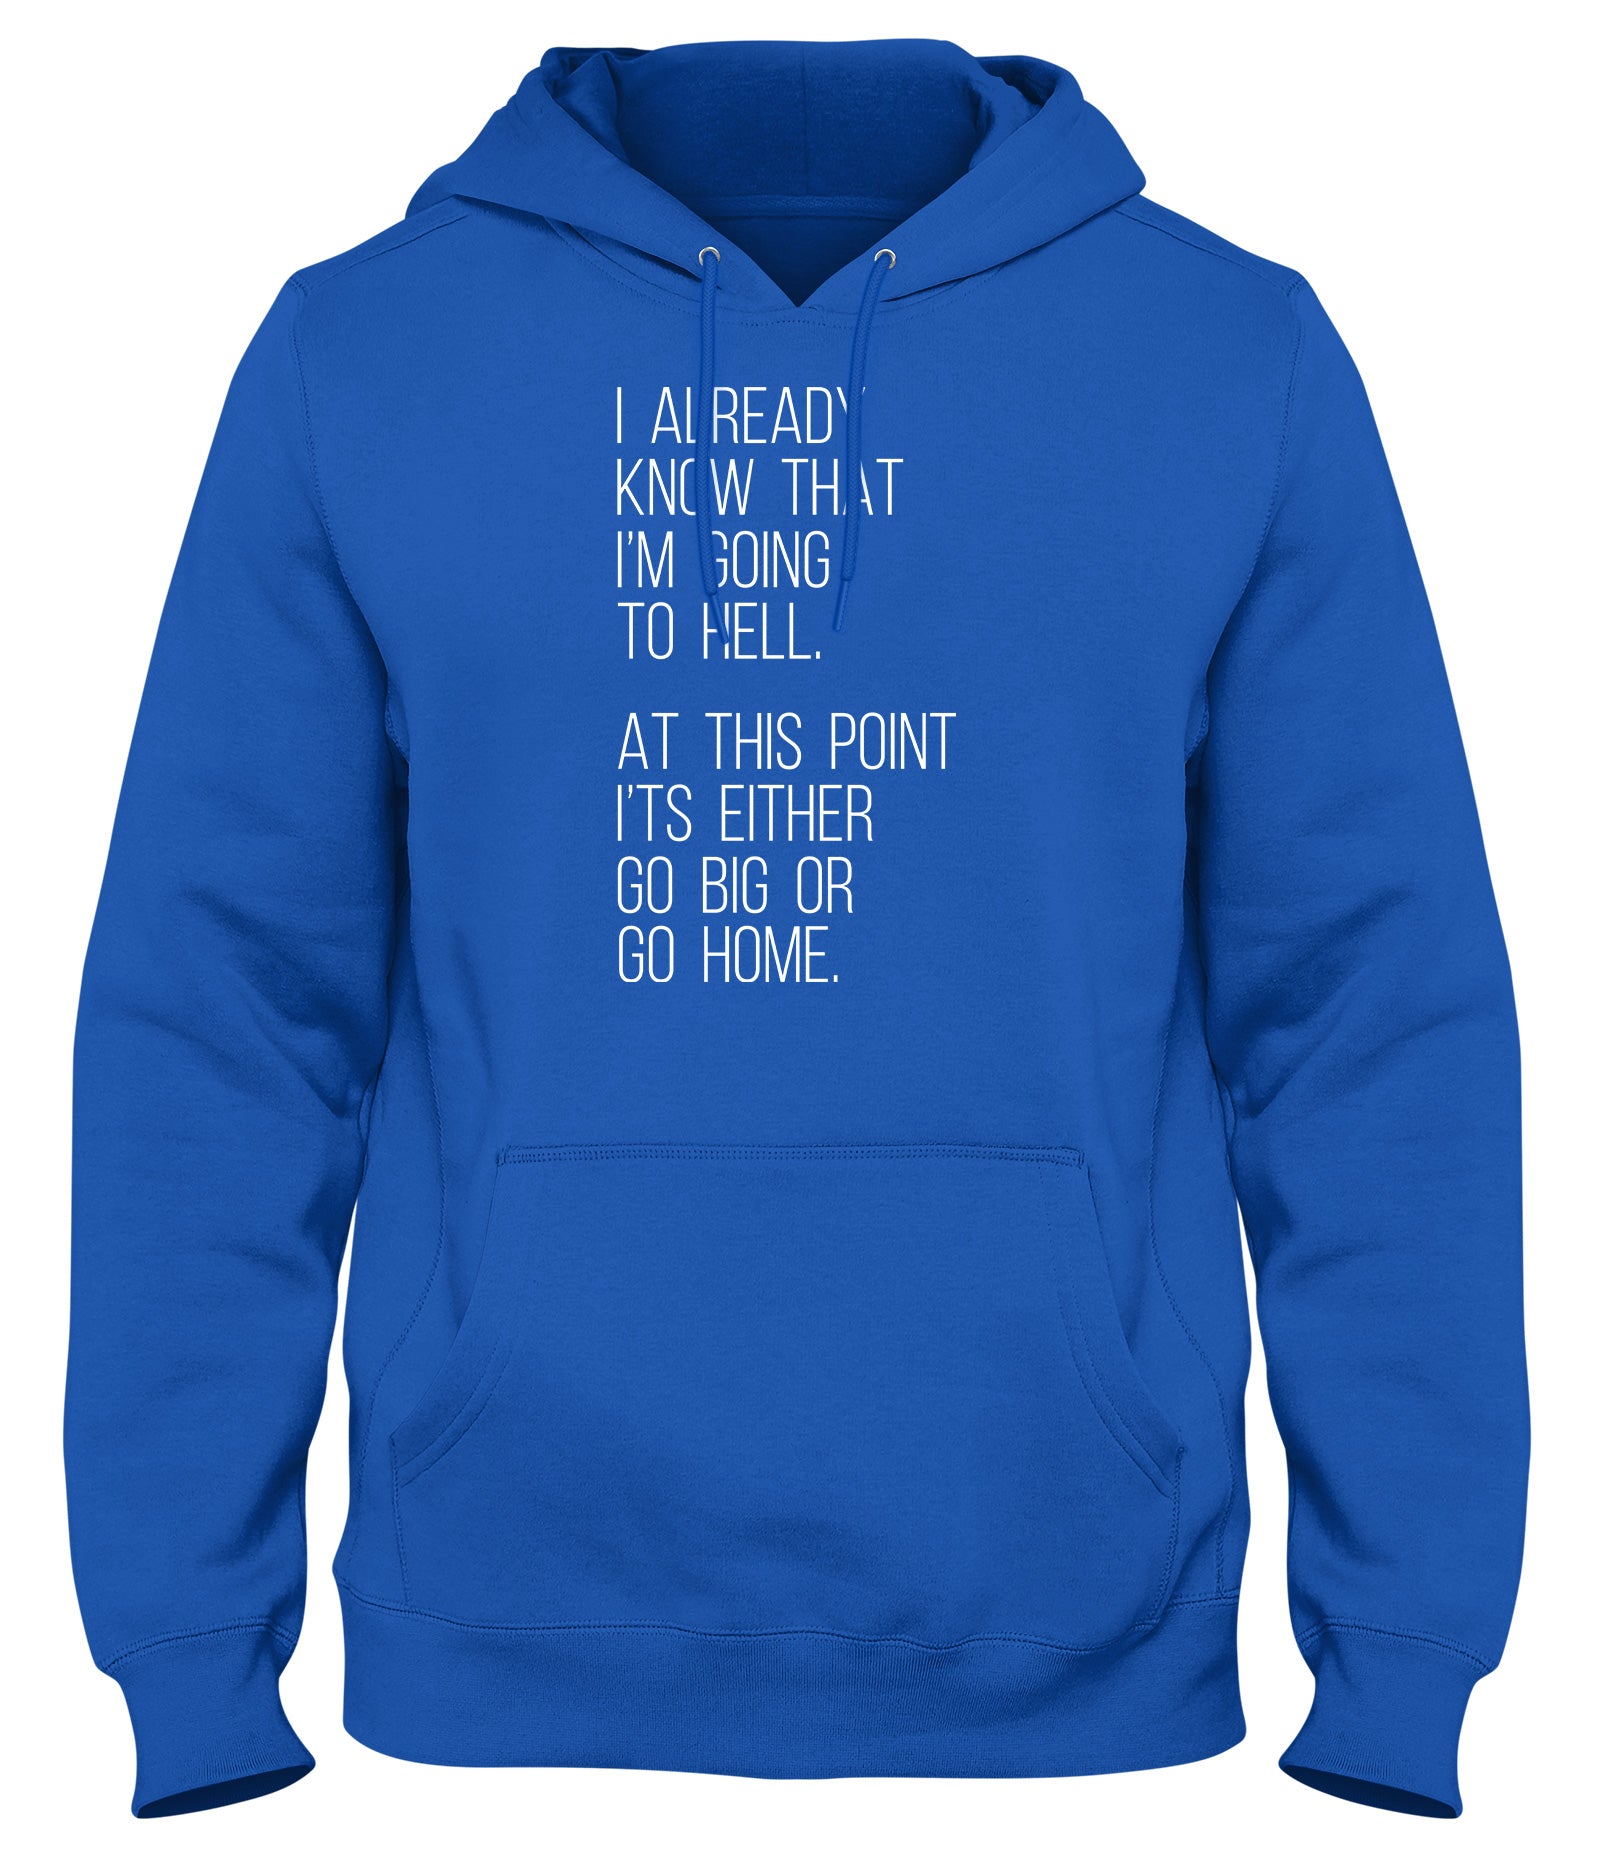 I ALREADY KNOW THAT I'M GOING TO HELL  AT THIS POINT IT'S EITHER GO BIG OR GO HOME WOMENS LADIES MENS UNISEX HOODIE